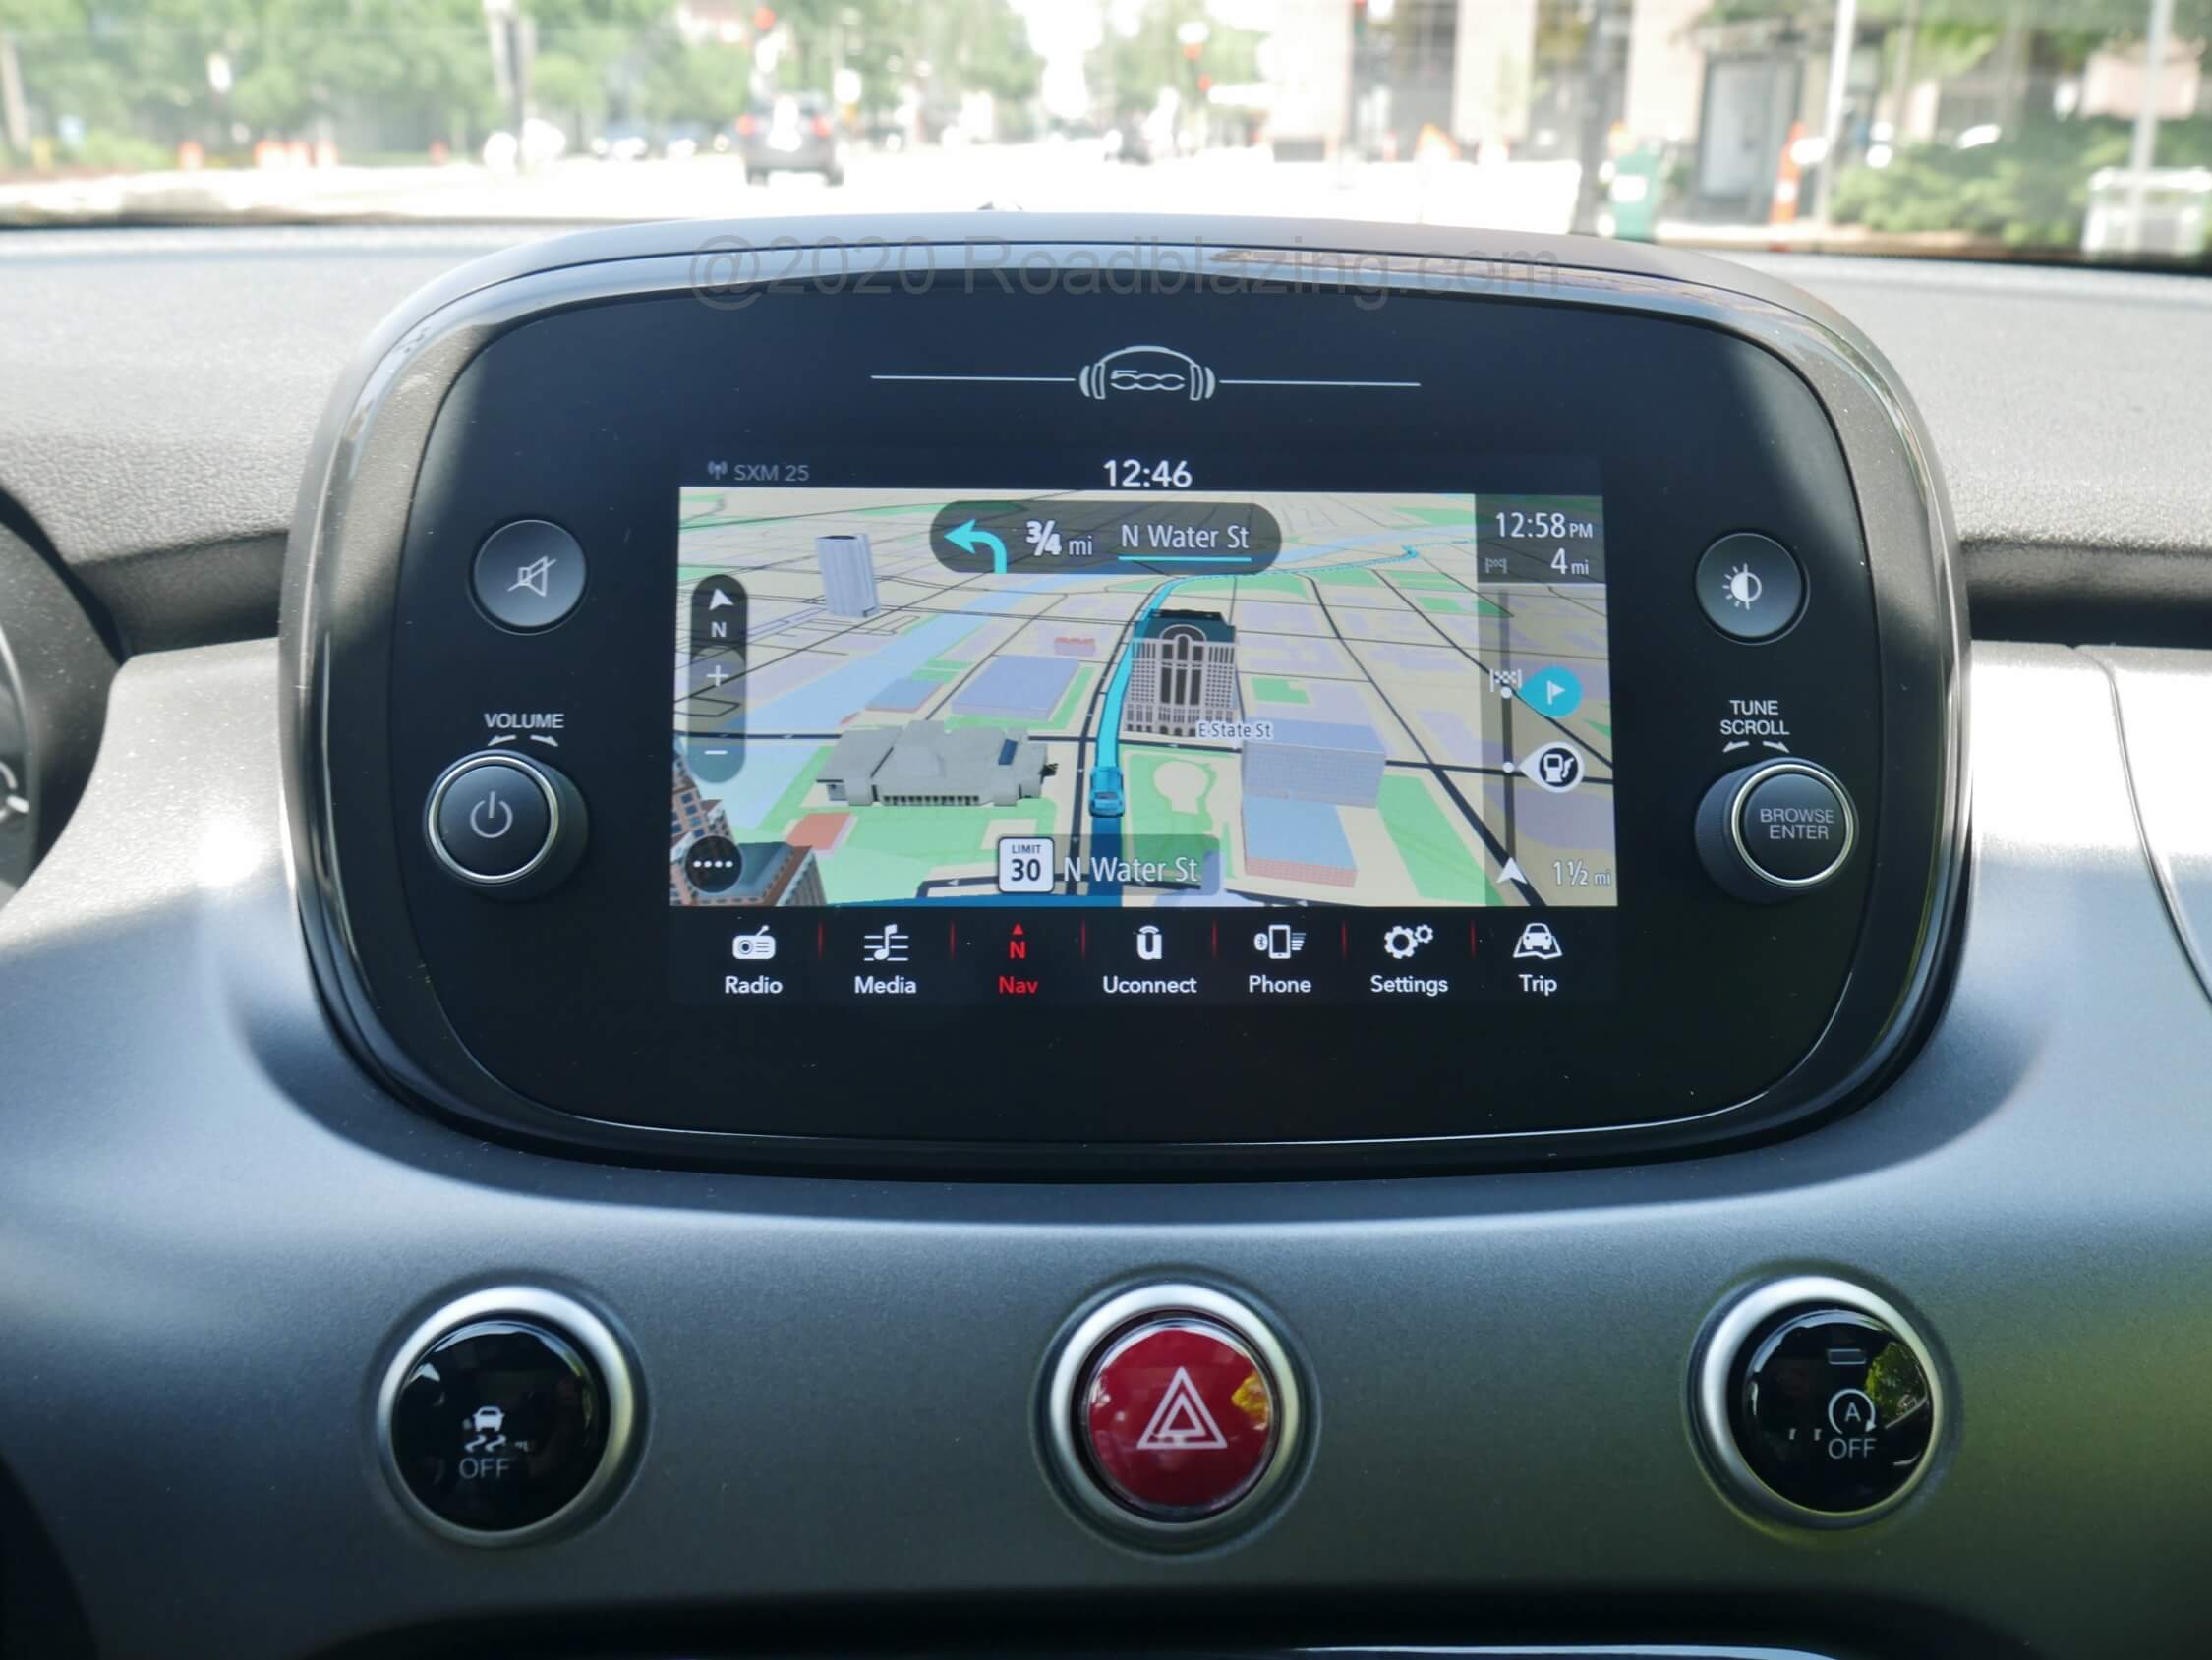 2020 FIAT 500X Sport AWD: 3-D map detail in the available Tom Tom GPS HDD voice command navigation displayed on 7.0" UConnect 4.0 LCD media screen